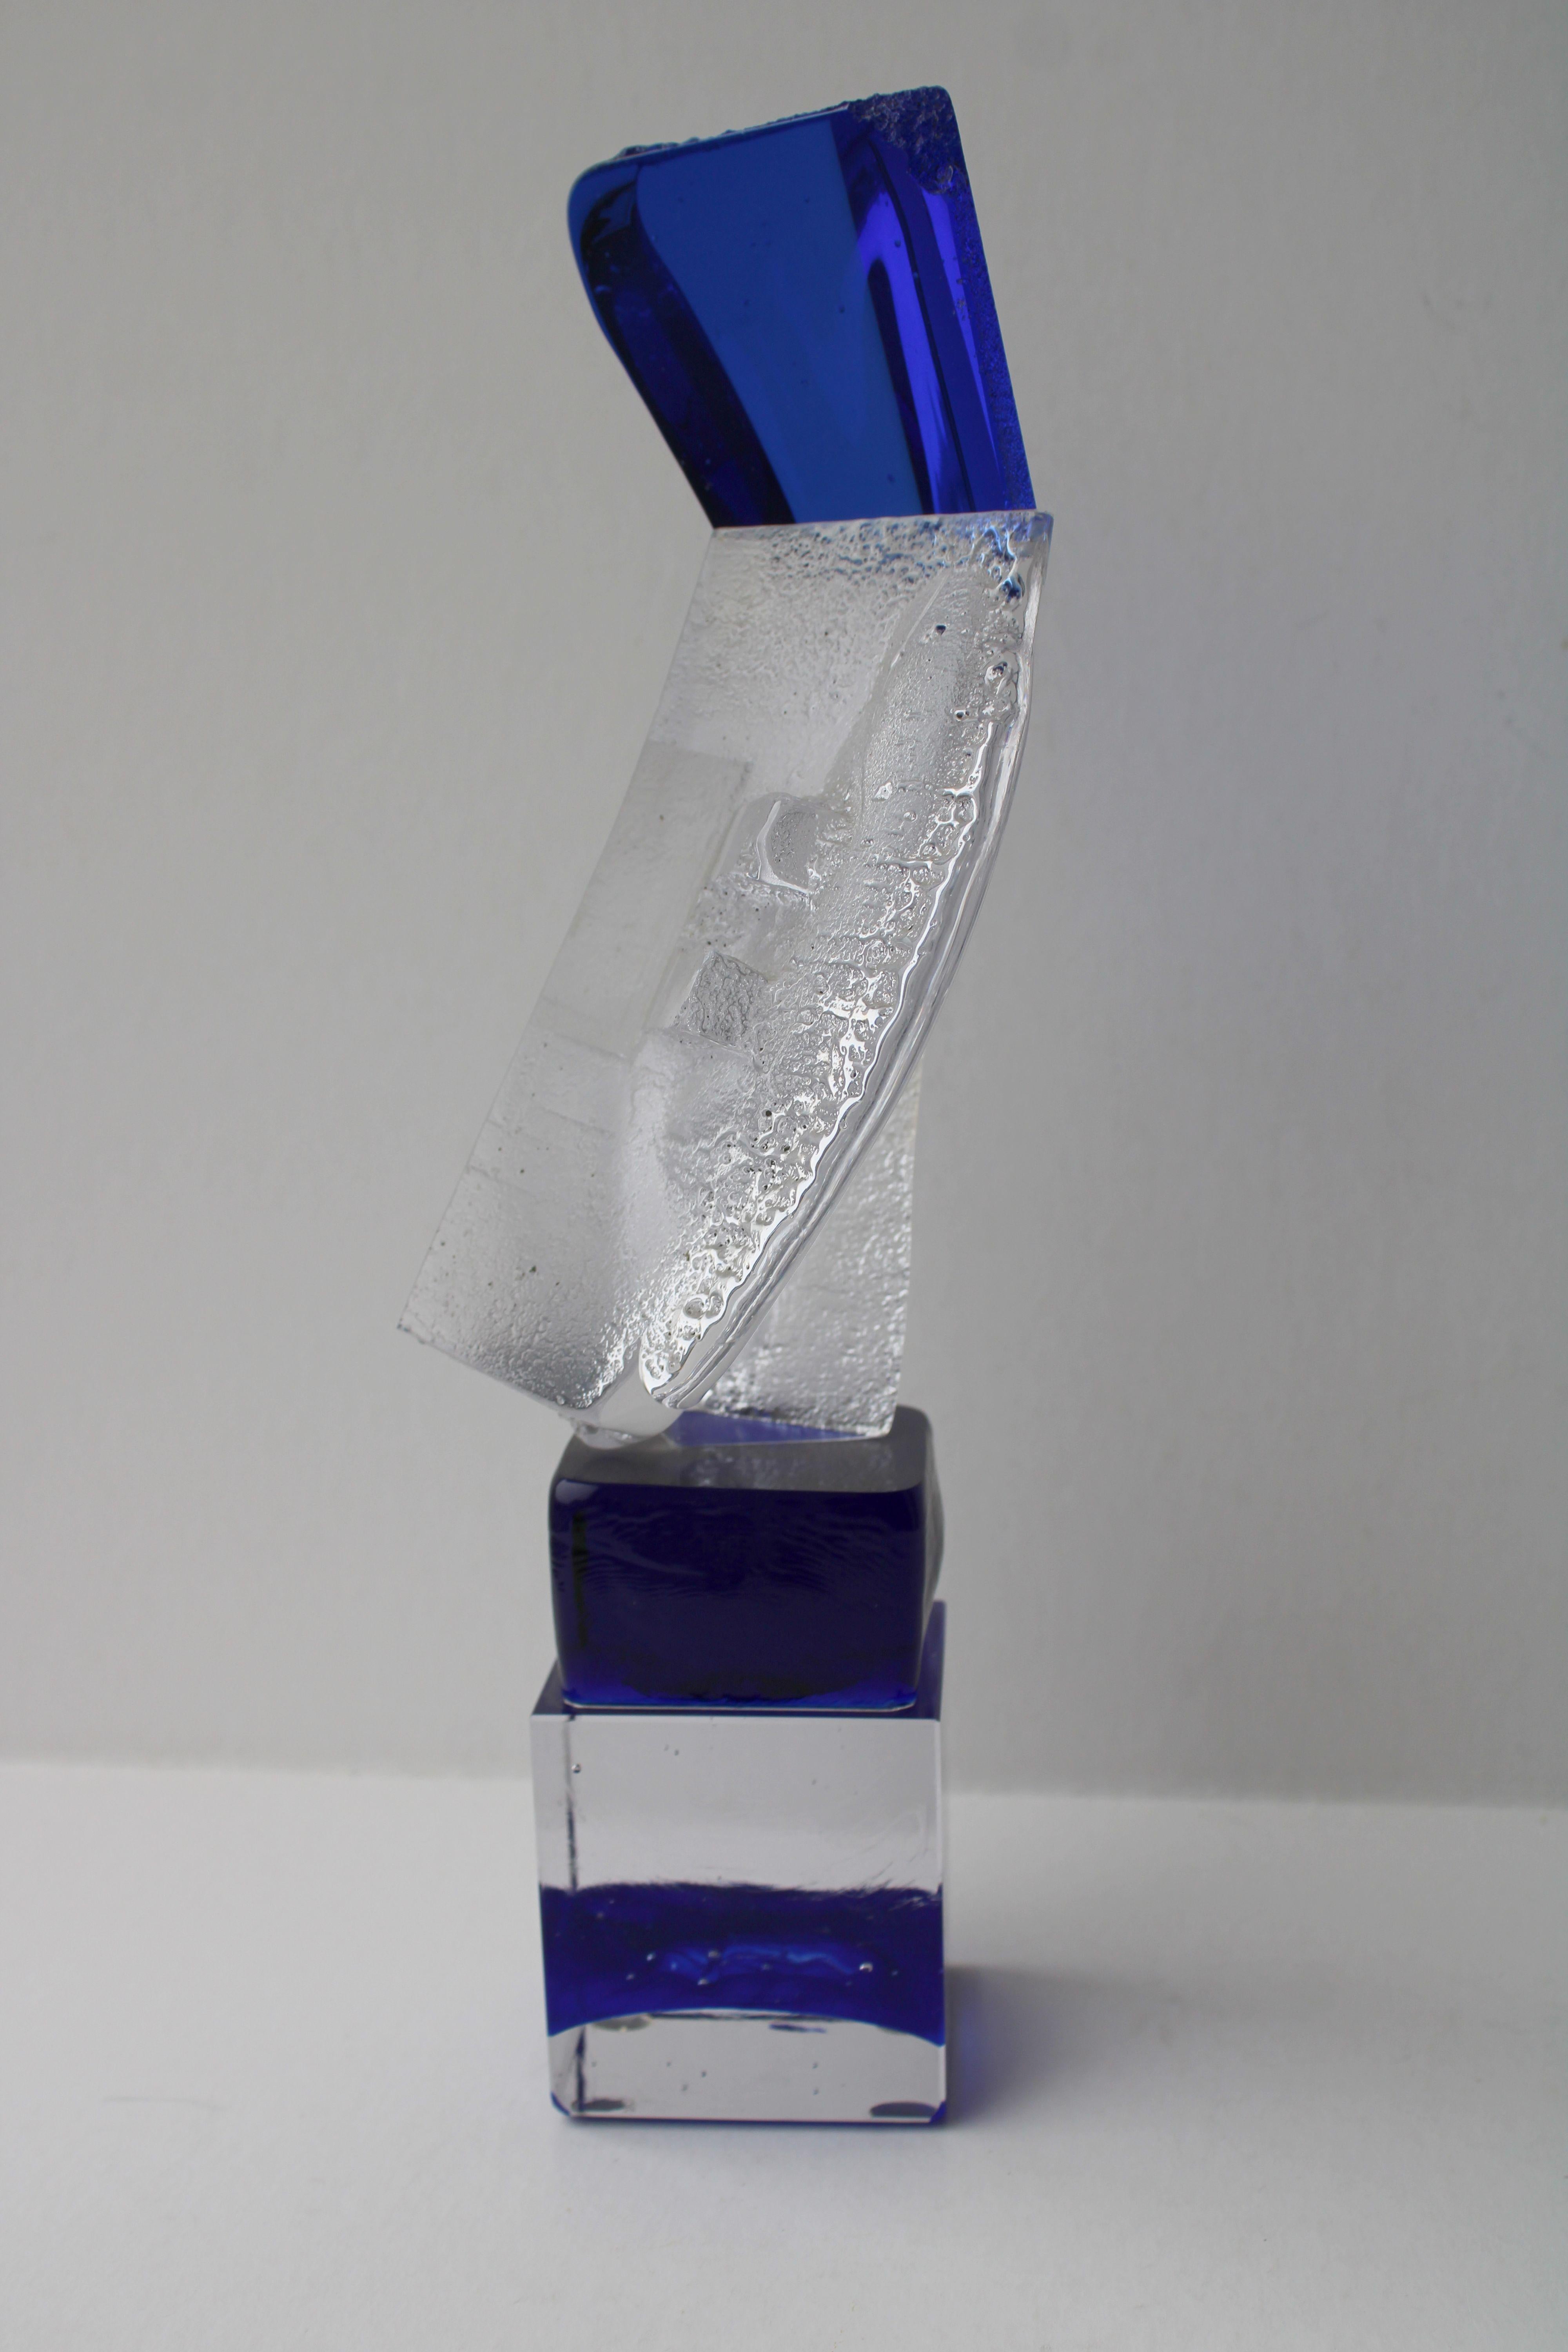 Blue. Glass, 34, 5x15x8 cm - Abstract Sculpture by Emane Inita